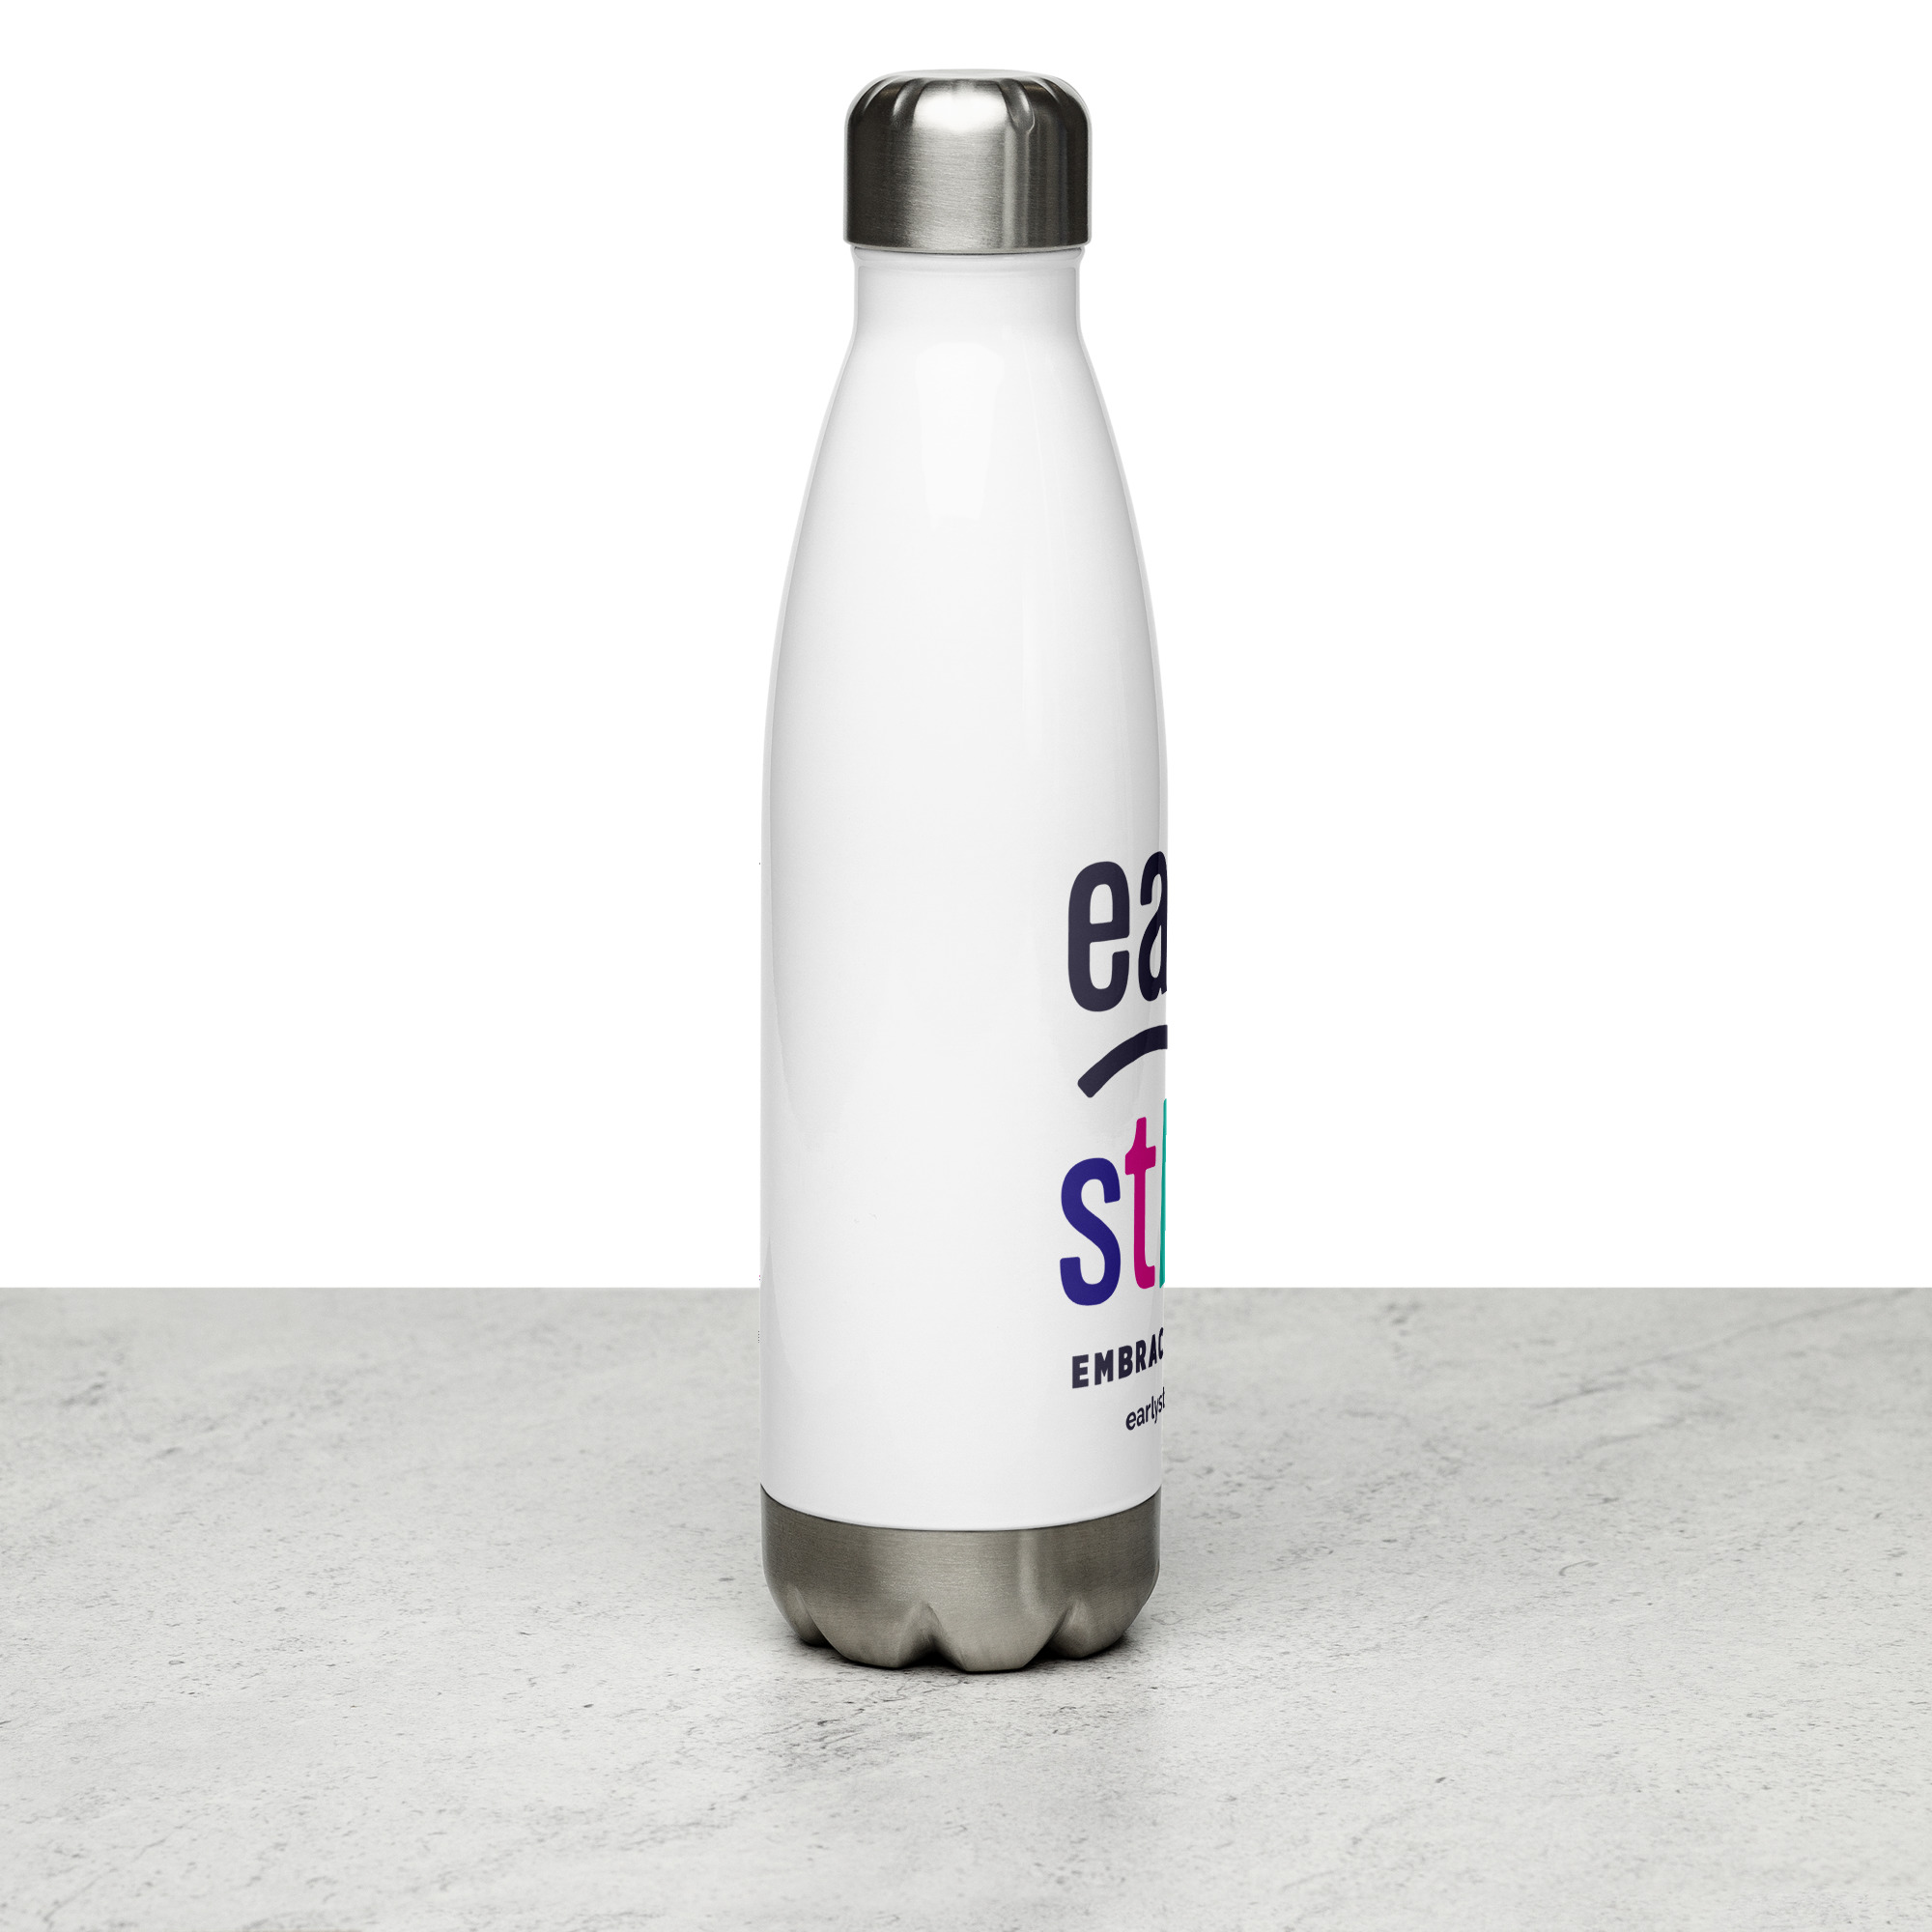 World's first stainless steel baby bottles – safe, strong and